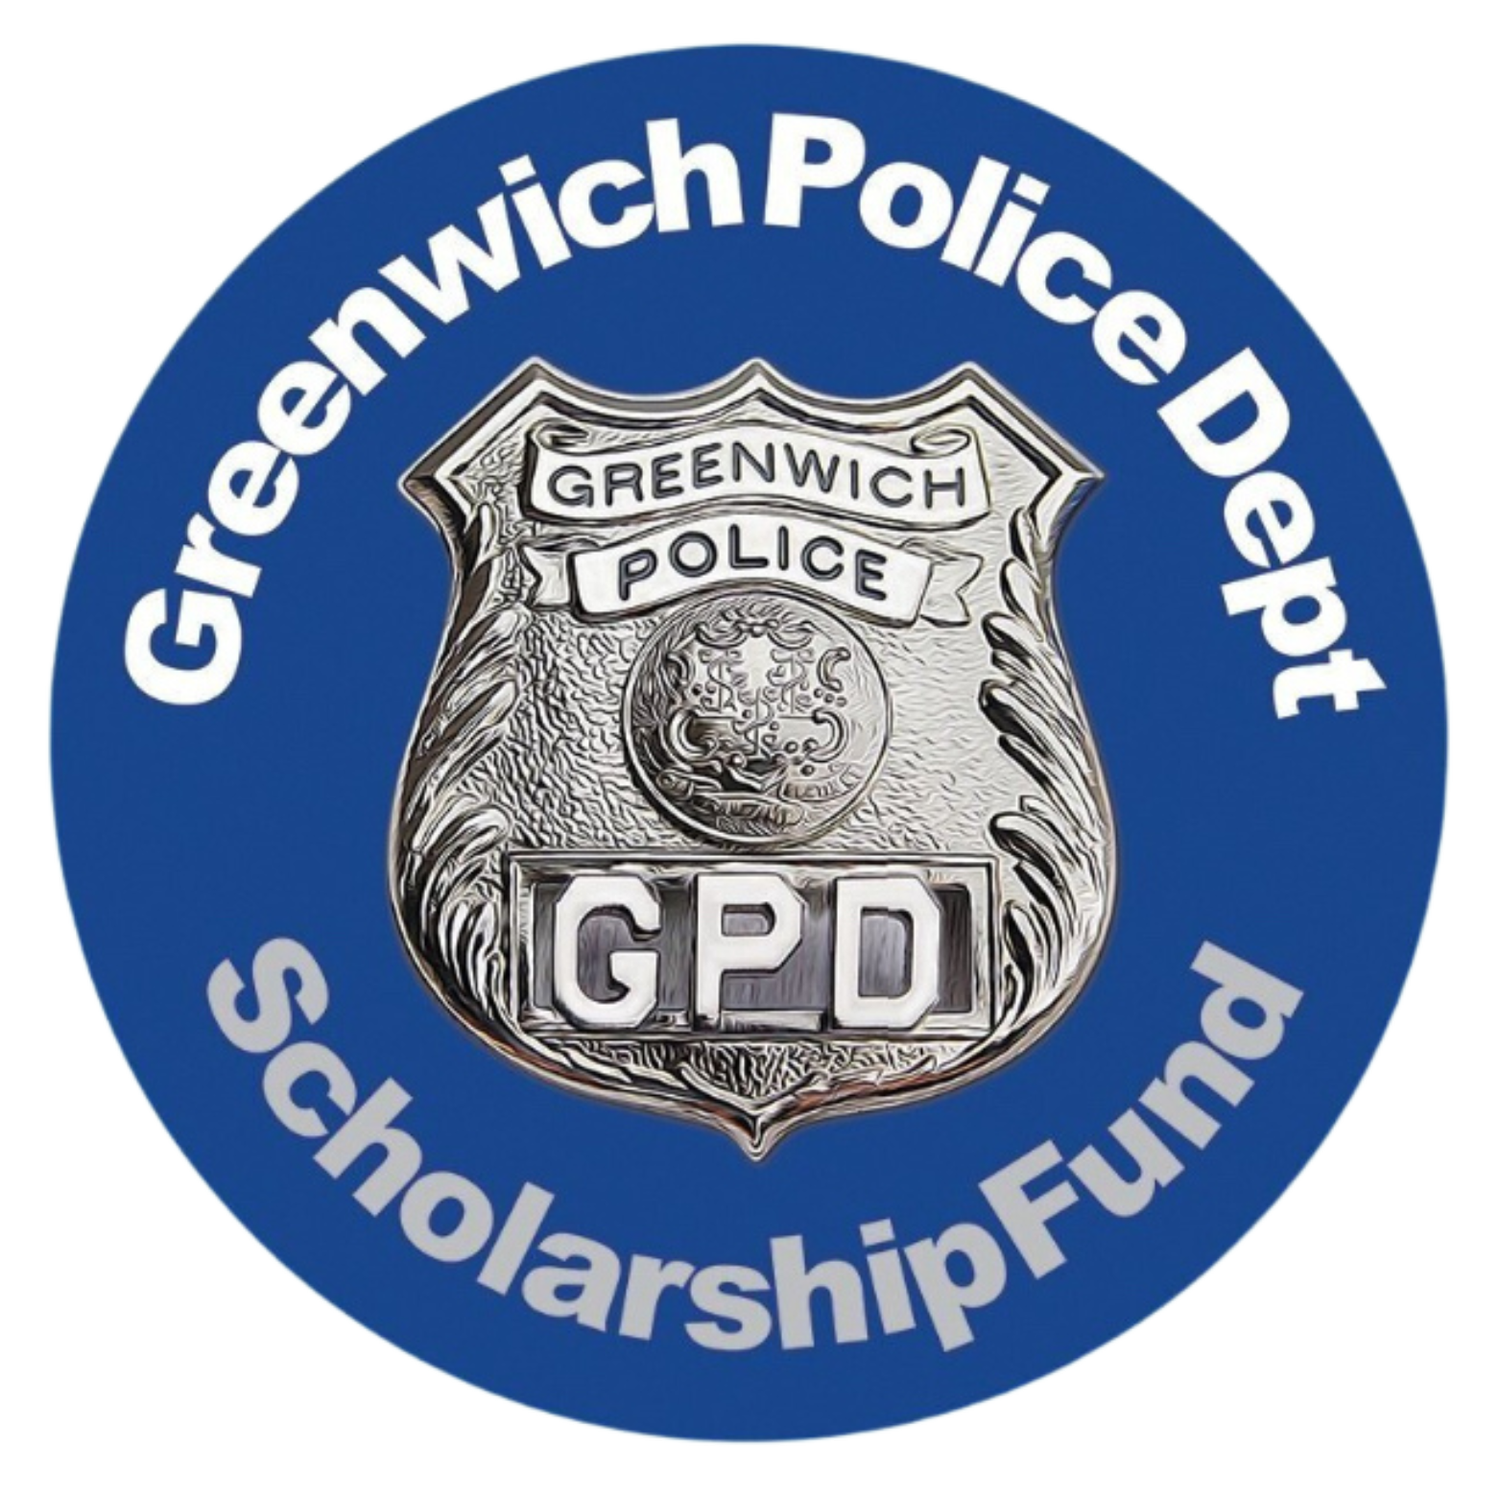 Greenwich Police Scholarship Donations